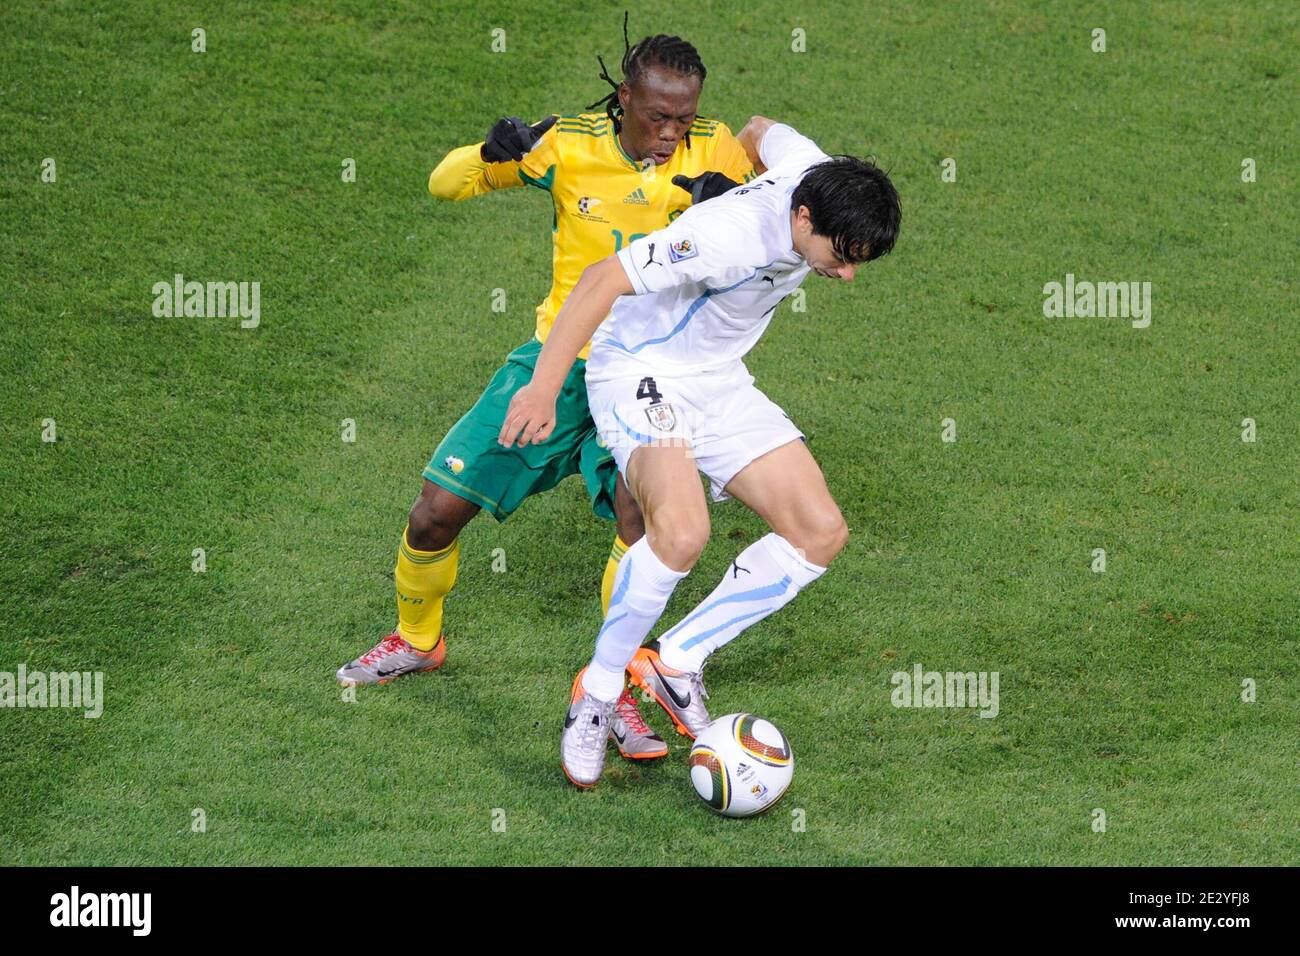 Uruguay's Jorge Fucile battles for the ball with South Africa's Reneilwe Letsholonyane during the 2010 FIFA World Cup South Africa Soccer match, group A, South Africa vs Uruguay at Loftus Versfeld football stadium in Pretoria, South Africa on June 16, 2010. Uruguay won 3-0. Photo by Henri Szwarc/ABACAPRESS.COM Stock Photo